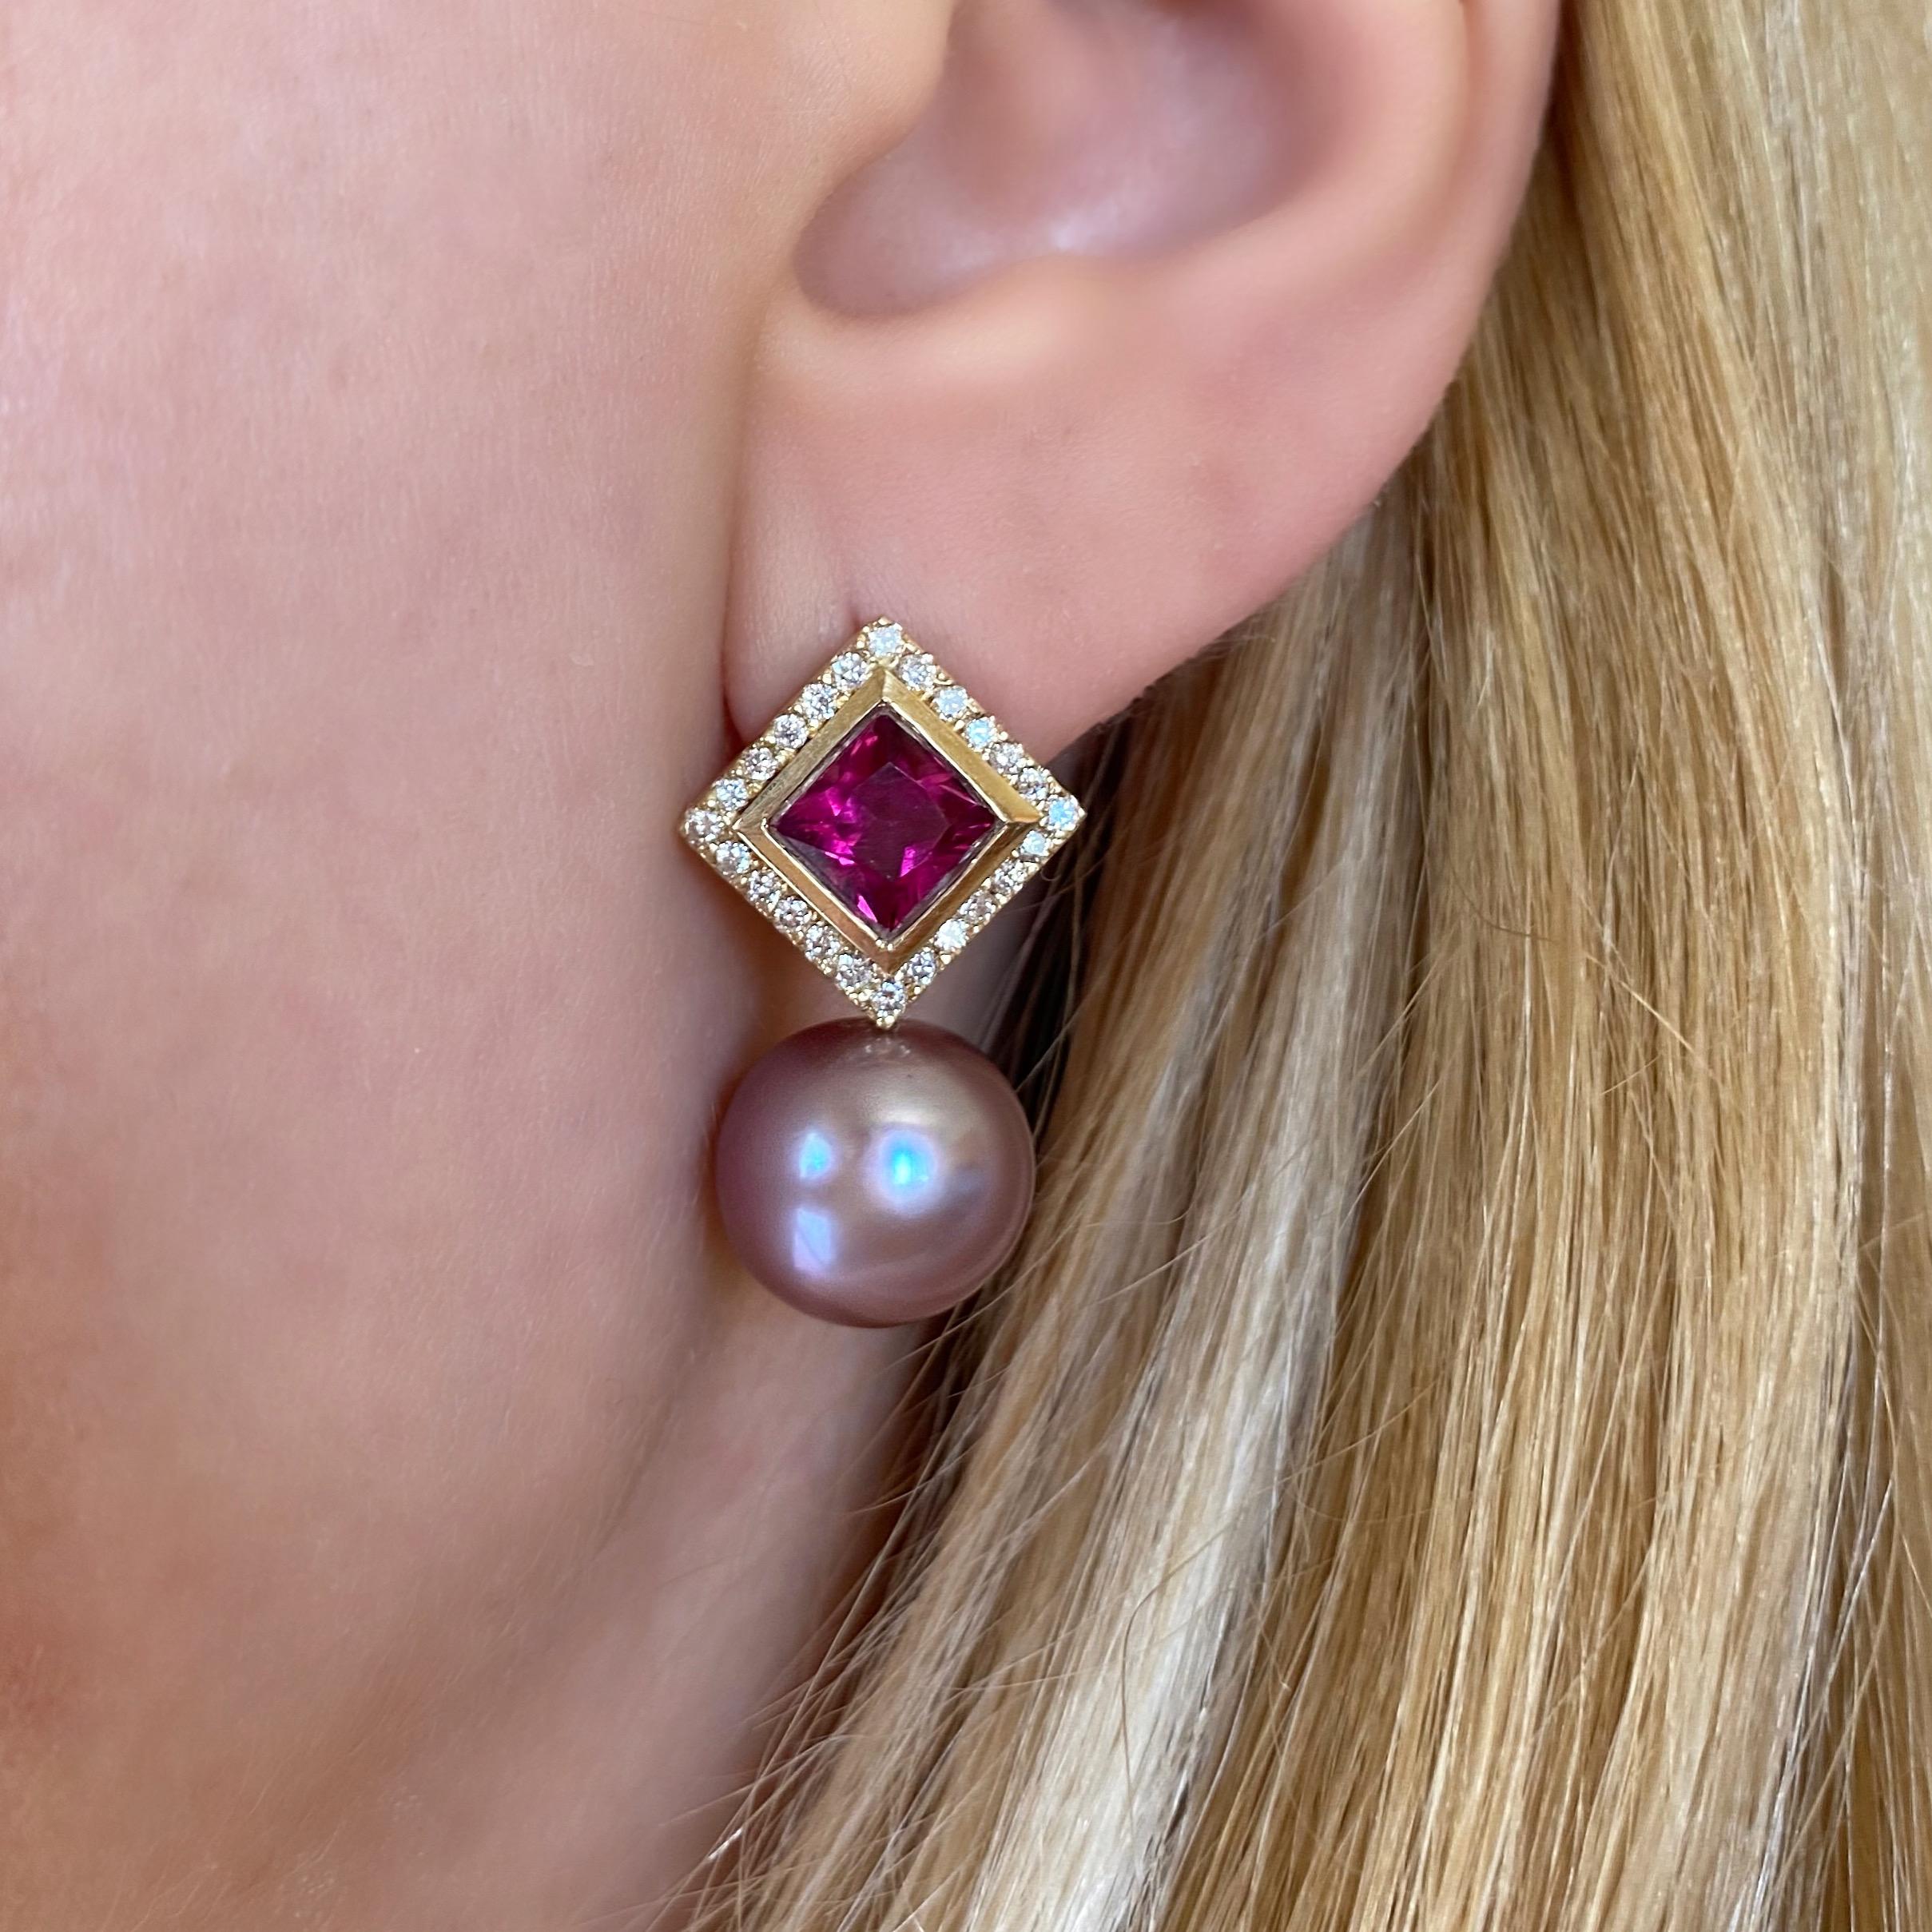 These one-of-a-kind earrings by Michelle Massoura are made in 18Karat Yellow Gold and set with a pair of princess cut Rubellites, surrounded by a bezel frame and a halo of glimmering natural diamonds. The earrings are strung by a lustrous pair of